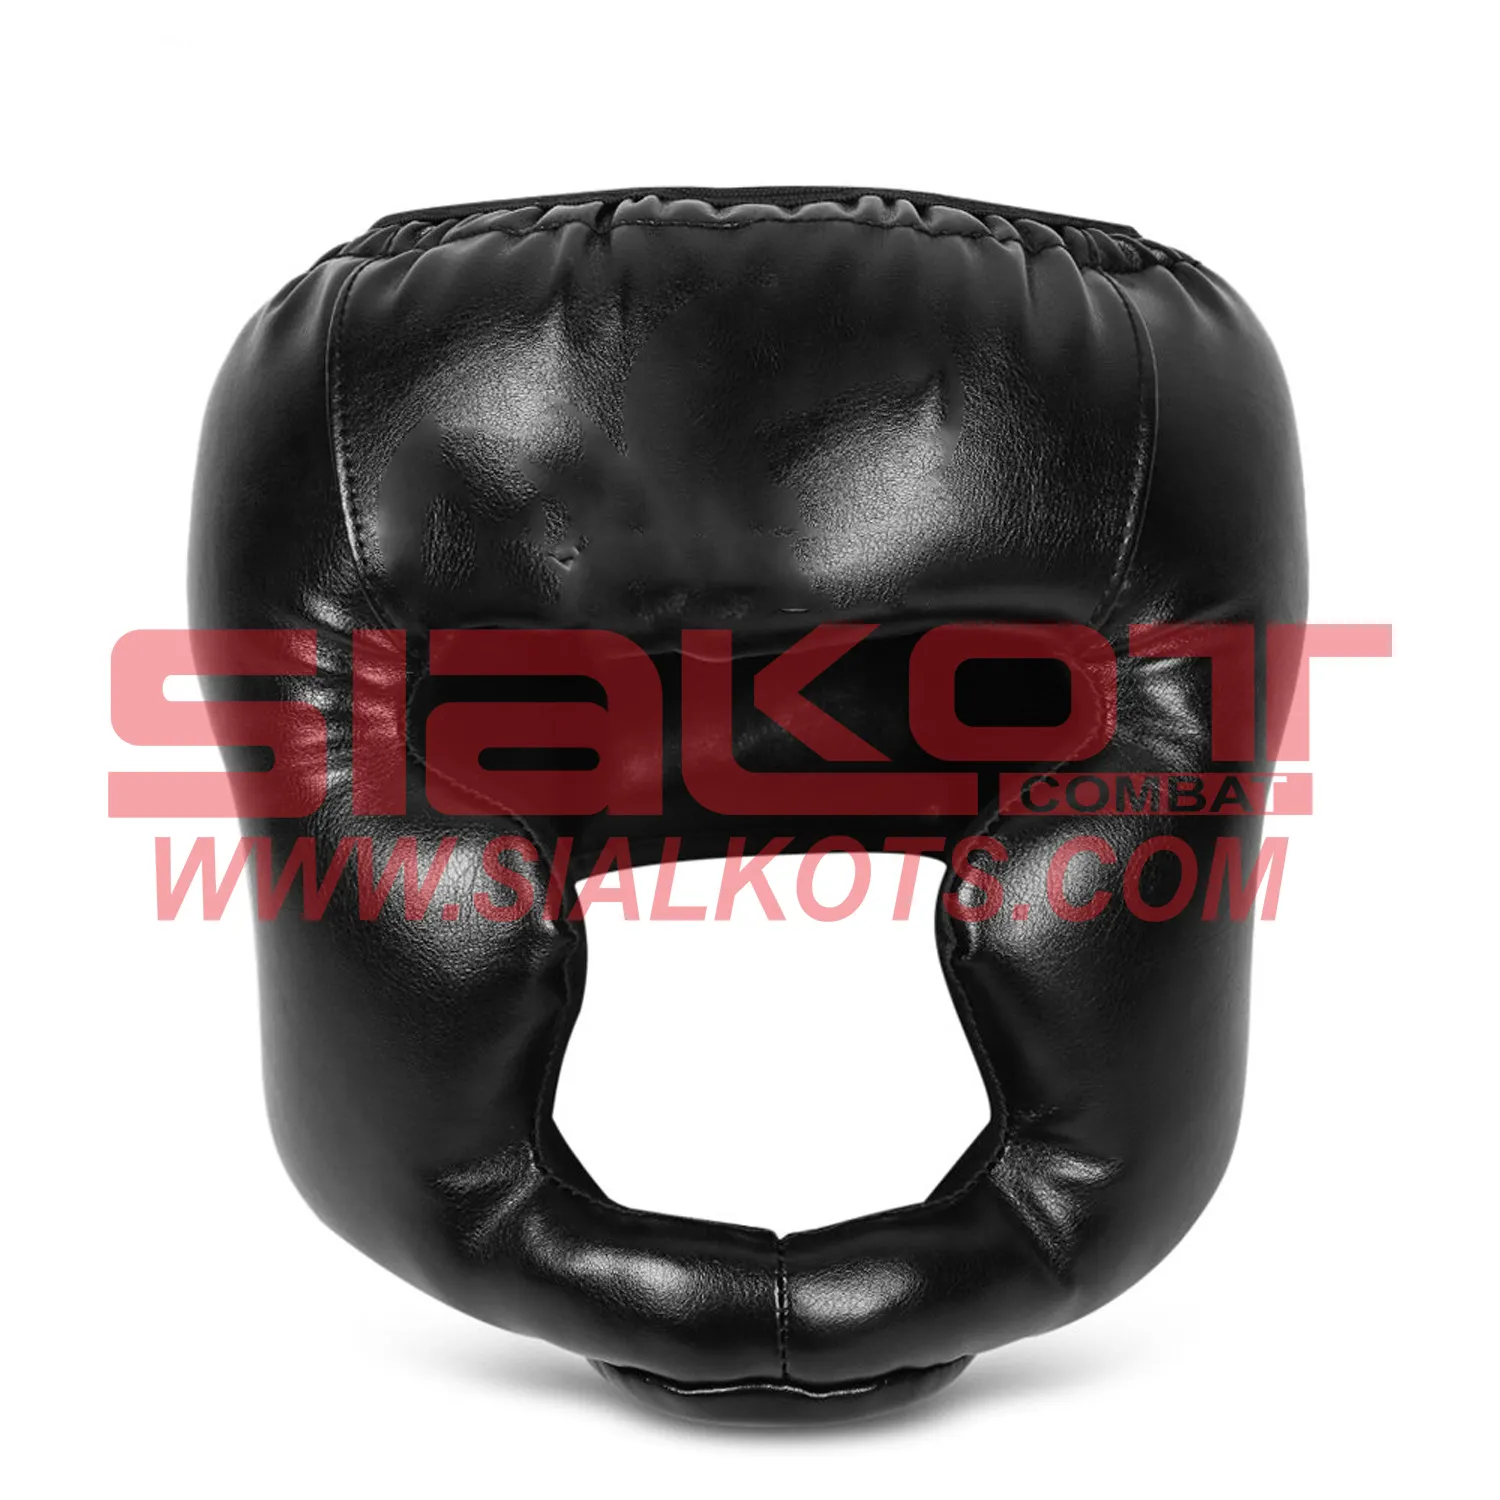 Headguard for Boxing MMA Training Head Guard with Removable Face Grill Cheeks Ear Mouth Protection Headgear